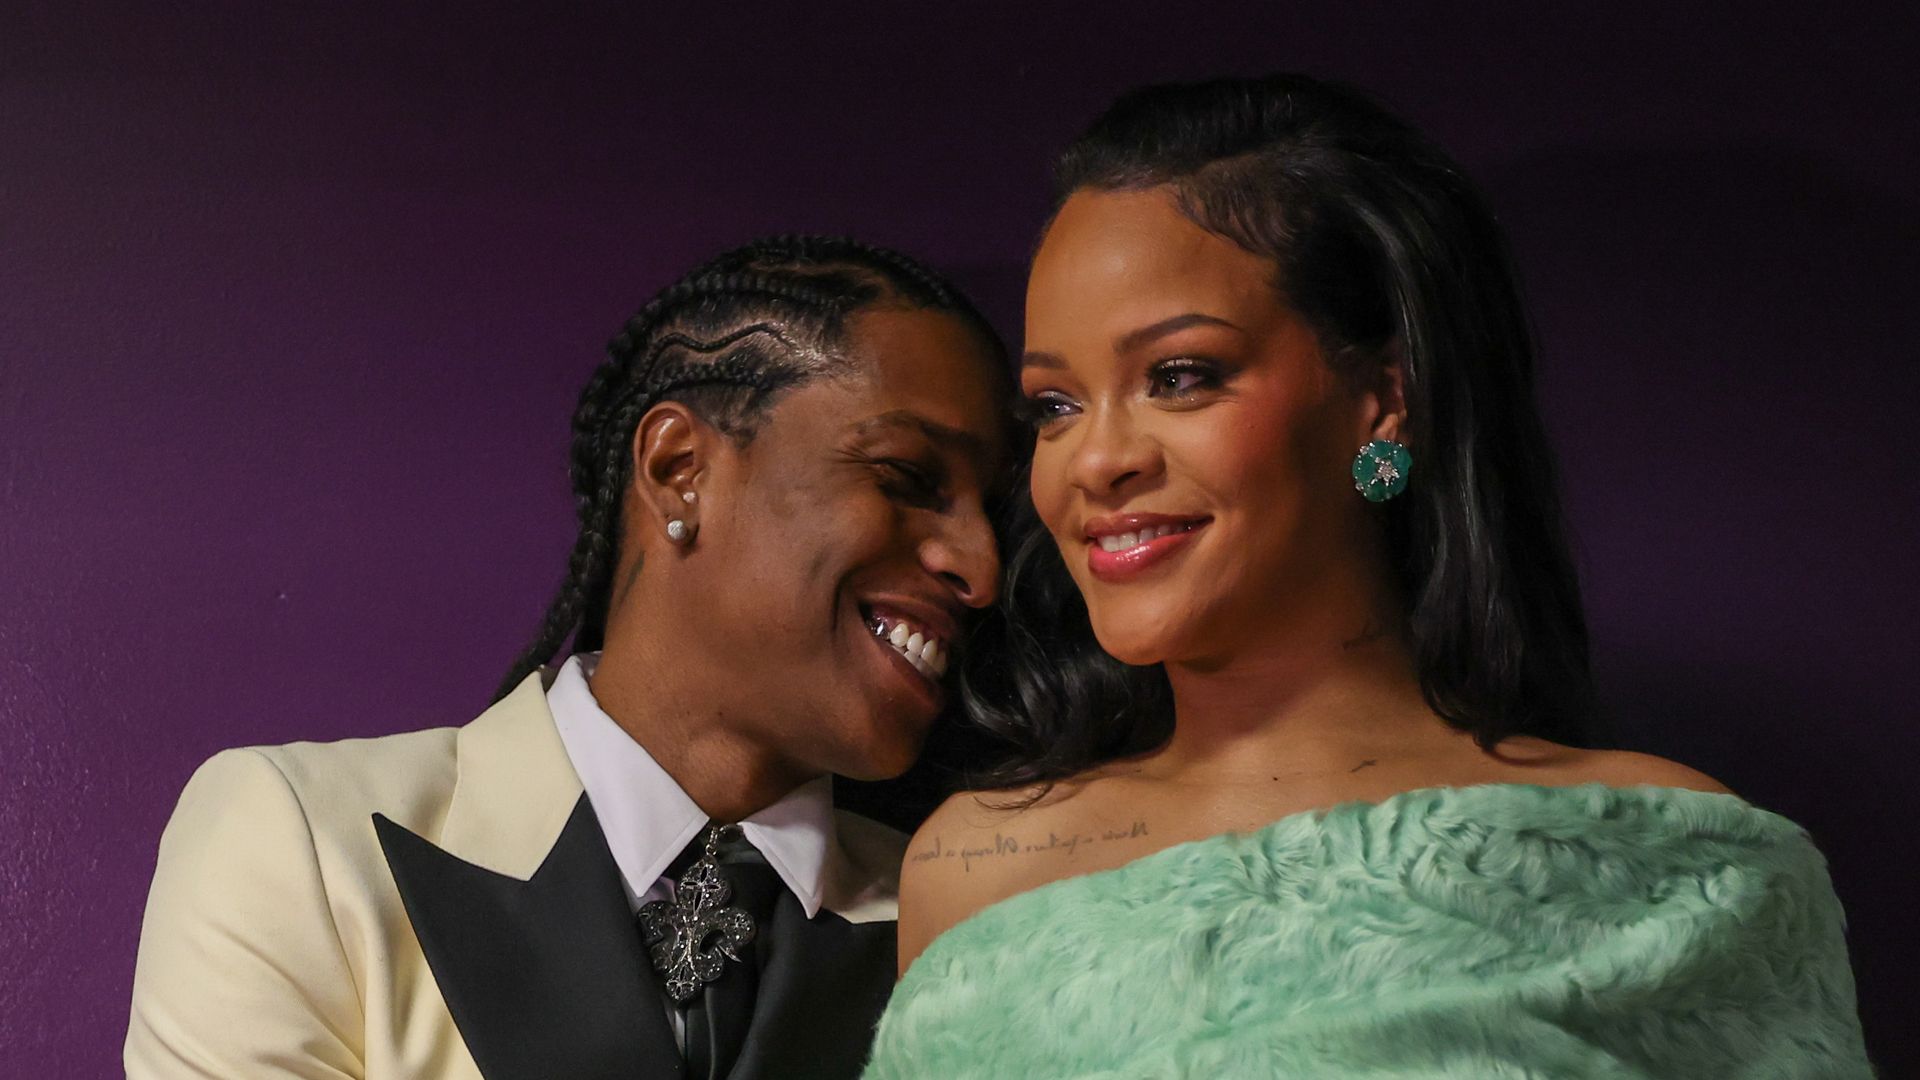 ASAP Rocky and Rihanna backstage at the 95th Academy Awards at the Dolby Theatre on March 12, 2023 in Hollywood, California.